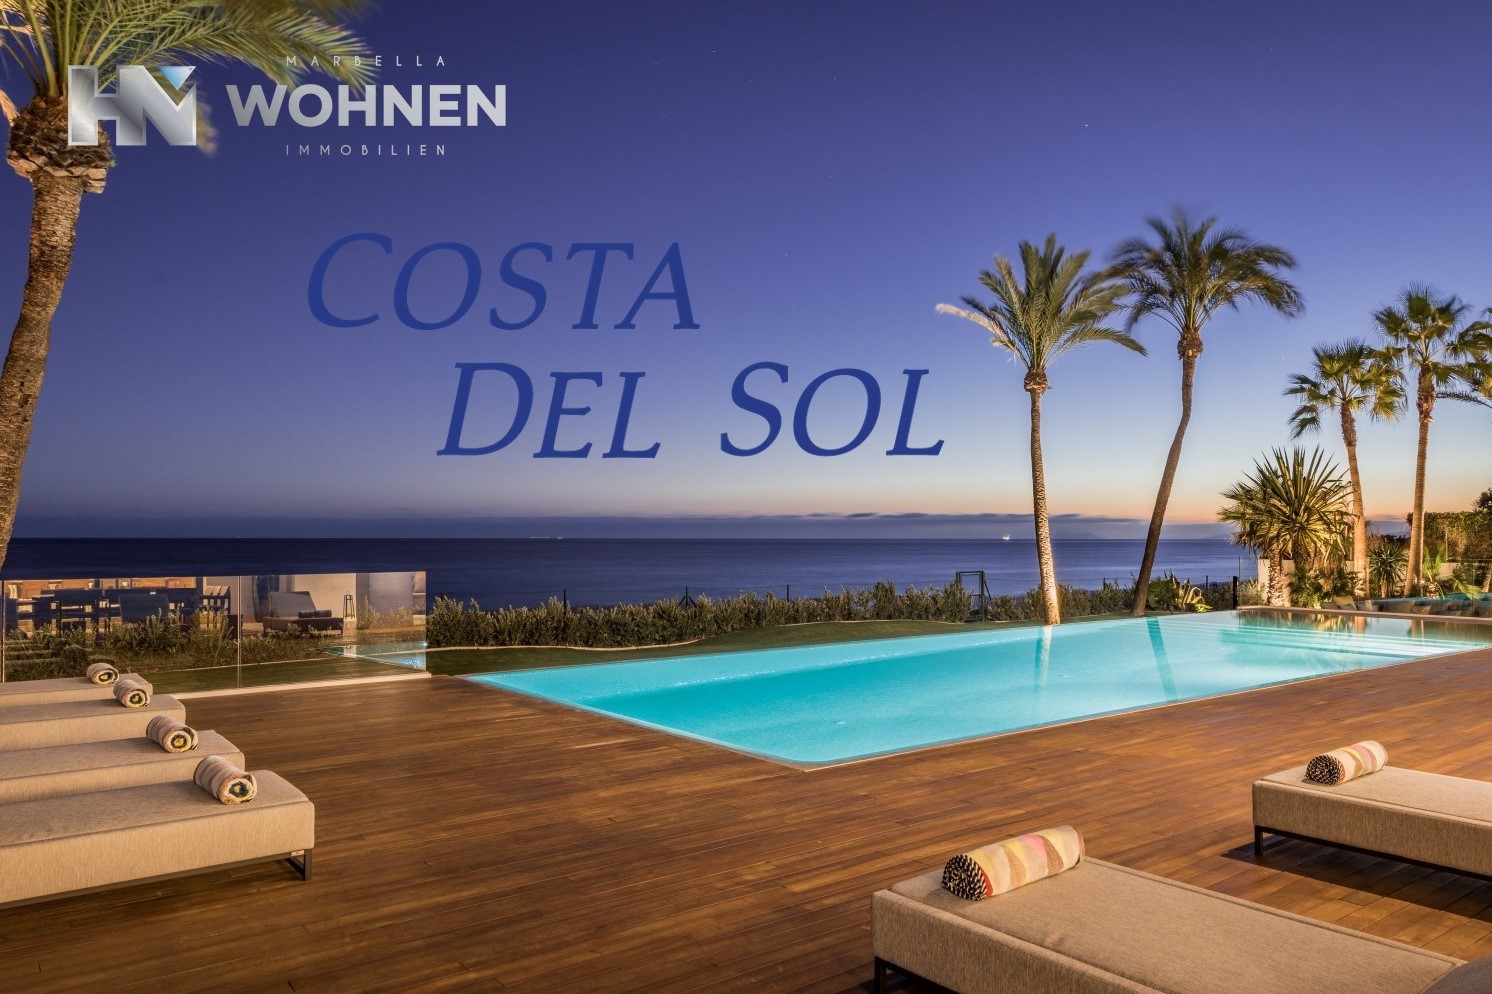 REAL ESTATE – MARBELLA WOHNEN – The Costa del Sol is the best place to live in Spain and here’s why!